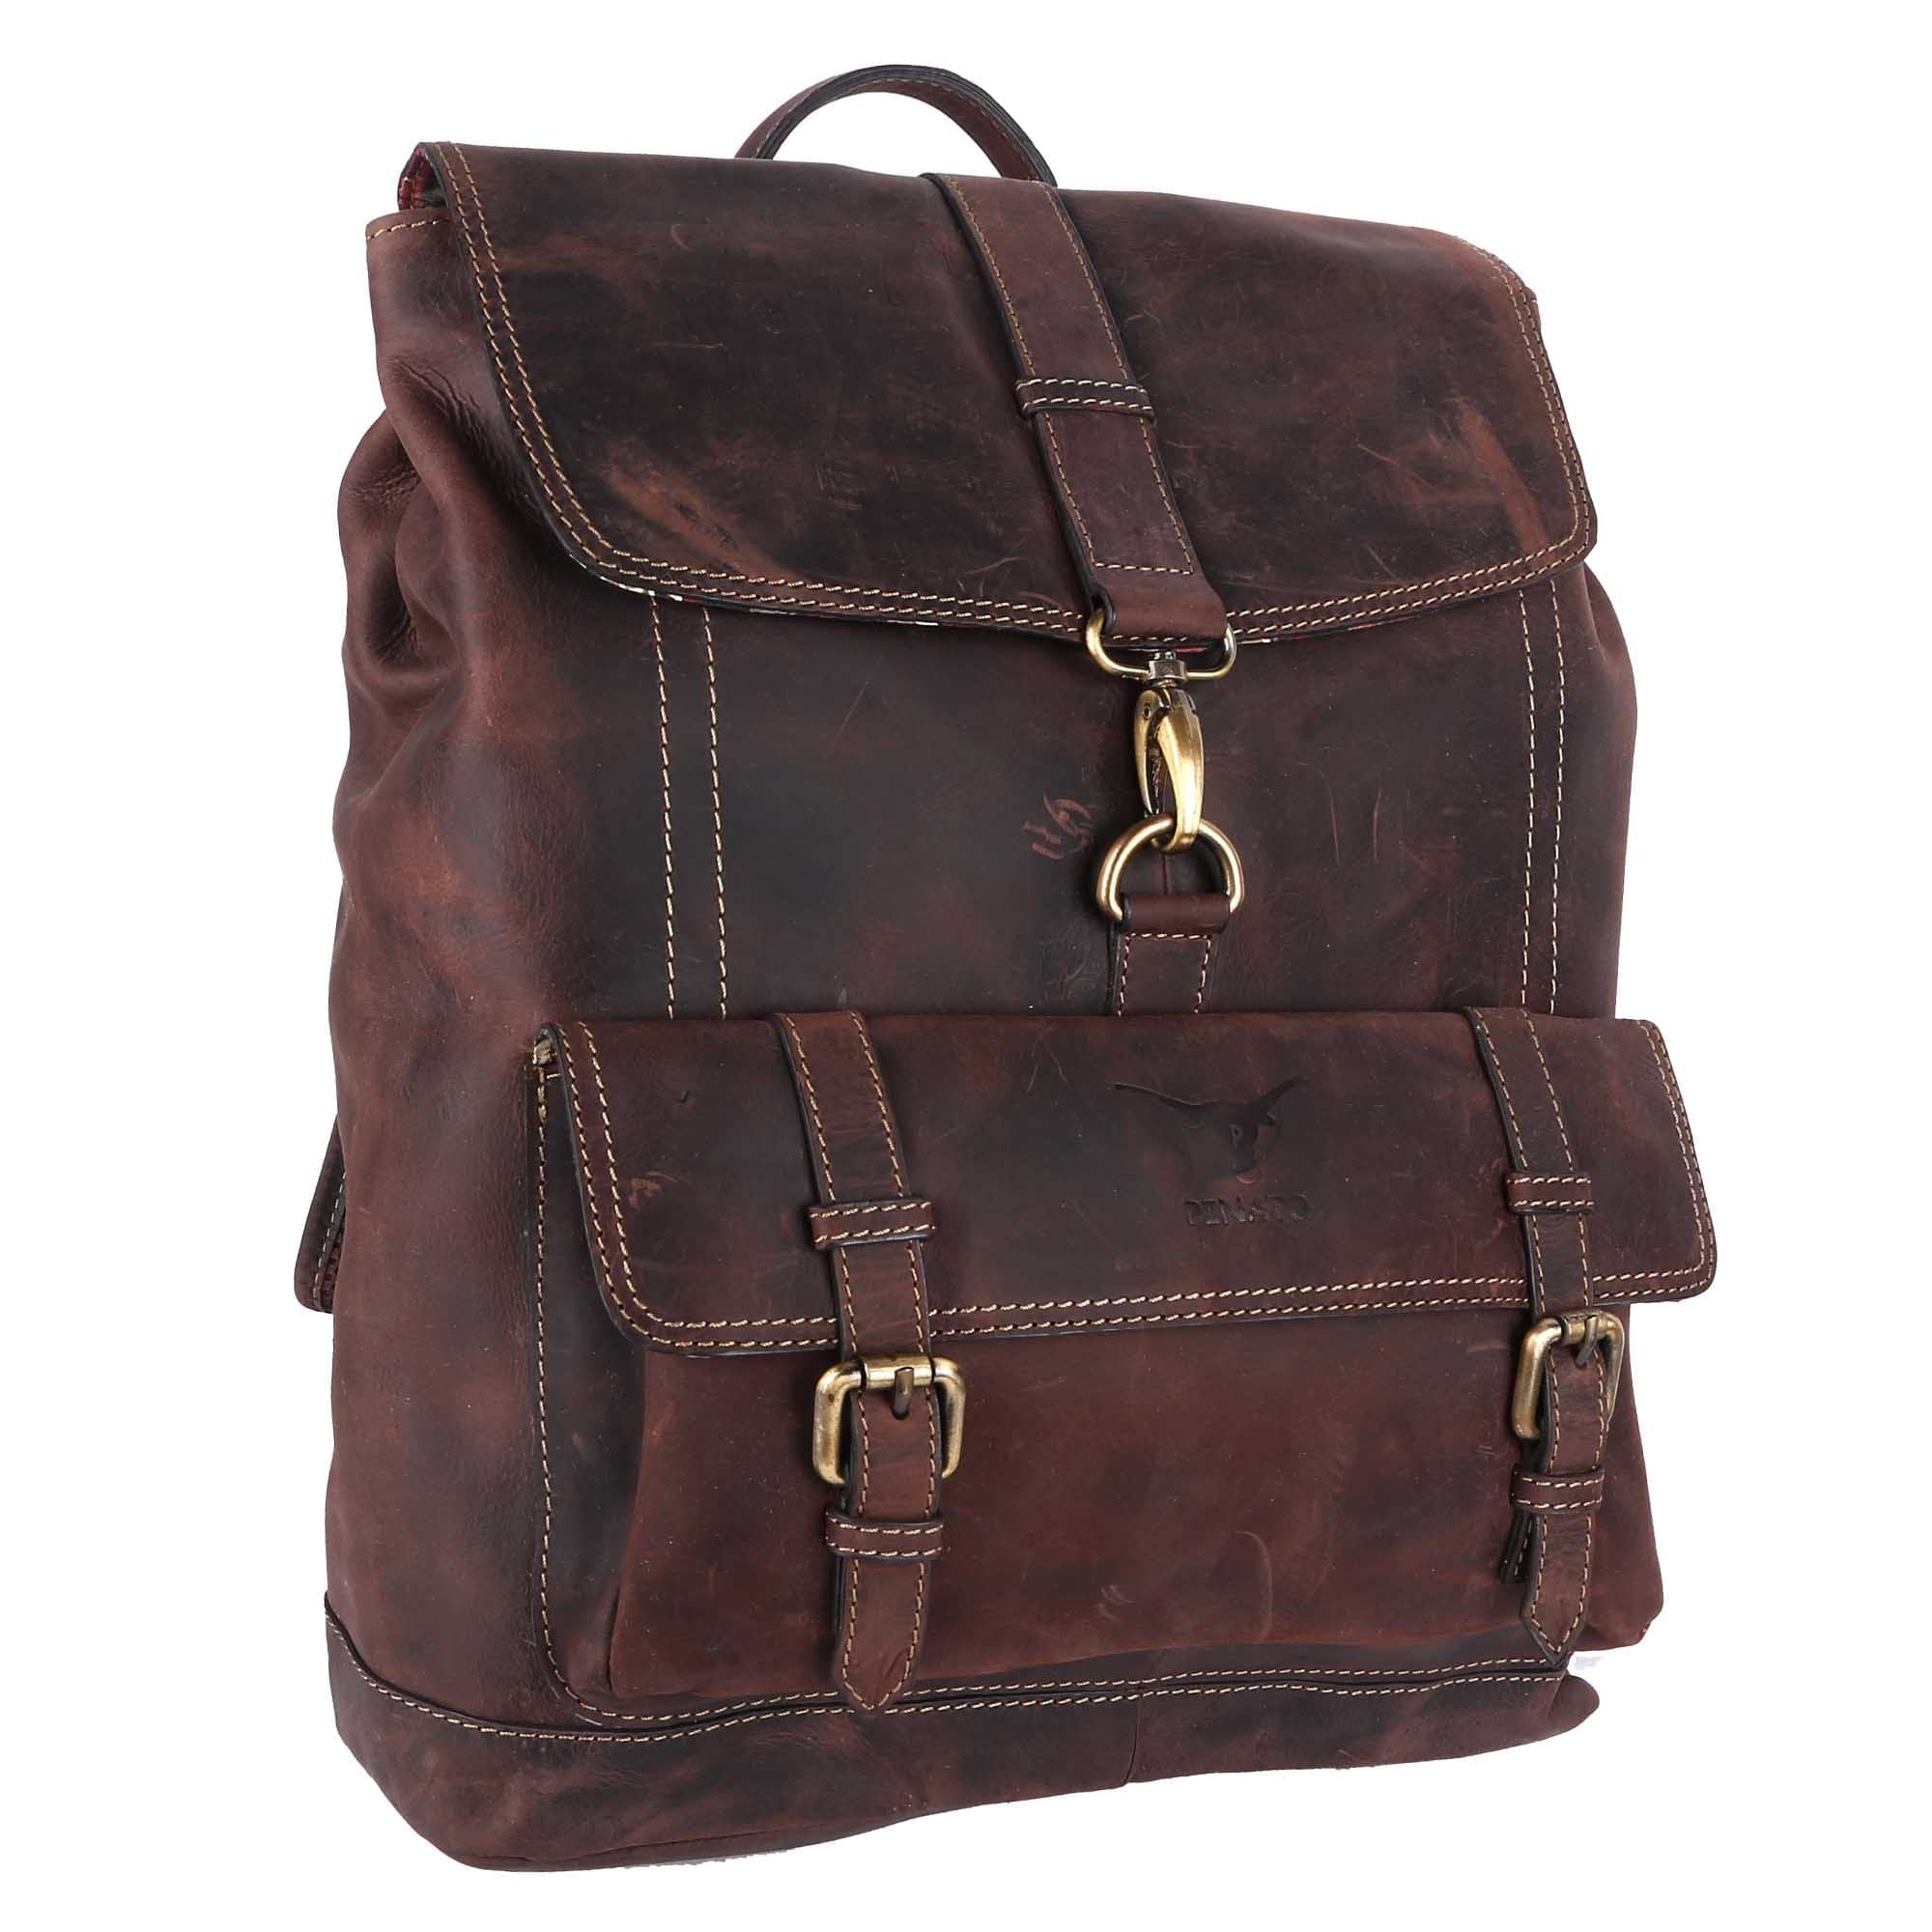 Pinato Genuine Leather Backpack Brown for Women & Men (PL-7717)